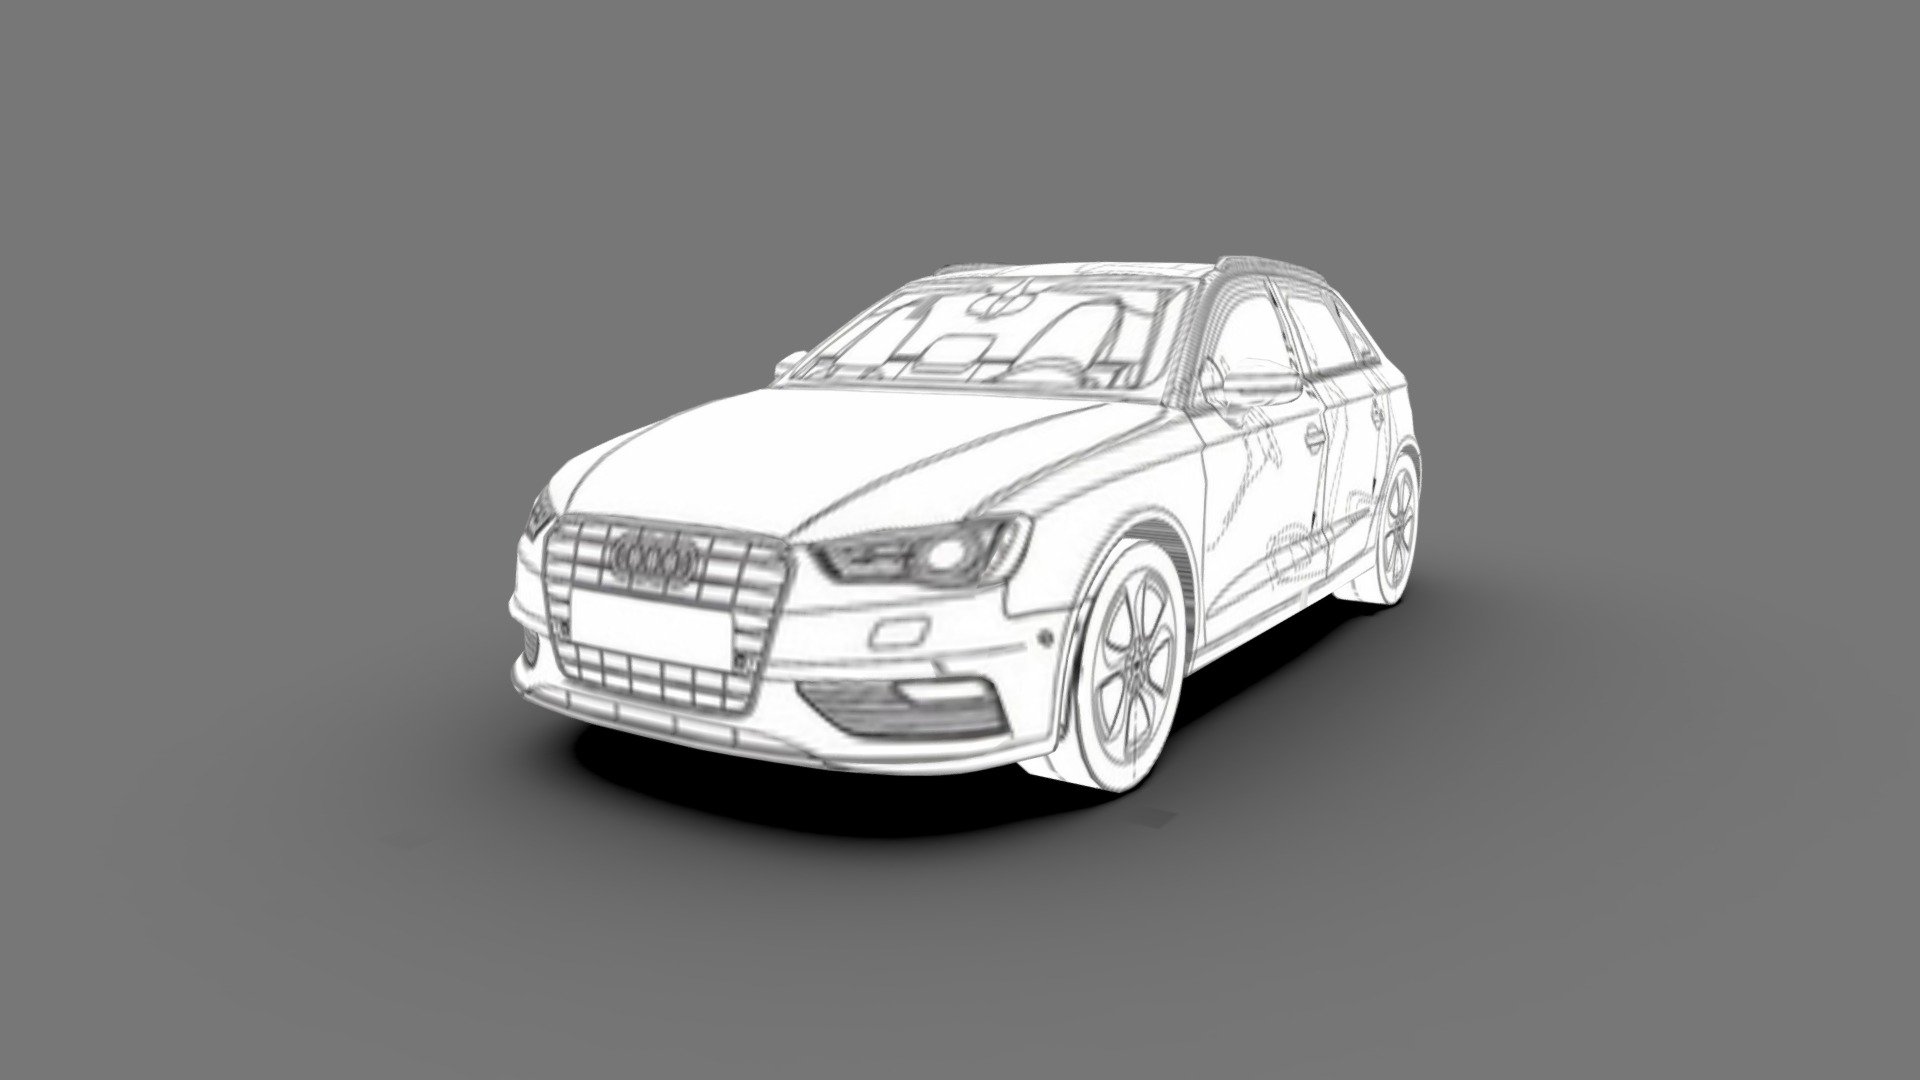 Low-poly, full-scale 3d blueprint model of the Audi A3 Sportback

Save time on modeling and just spend on customization tailored to your specific needs.
Your work gets very simplified due to the texture applied to the model, which is the blueprint itself.
You can also use the model directly in architectural or design projects.

Package includes 5 file formats and texture (3ds, fbx, dae, obj and skp)

Hope you enjoy it.
José Bronze - Audi A3 Sportback 3d blueprint - Buy Royalty Free 3D model by Jose Bronze (@pinceladas3d) 3d model